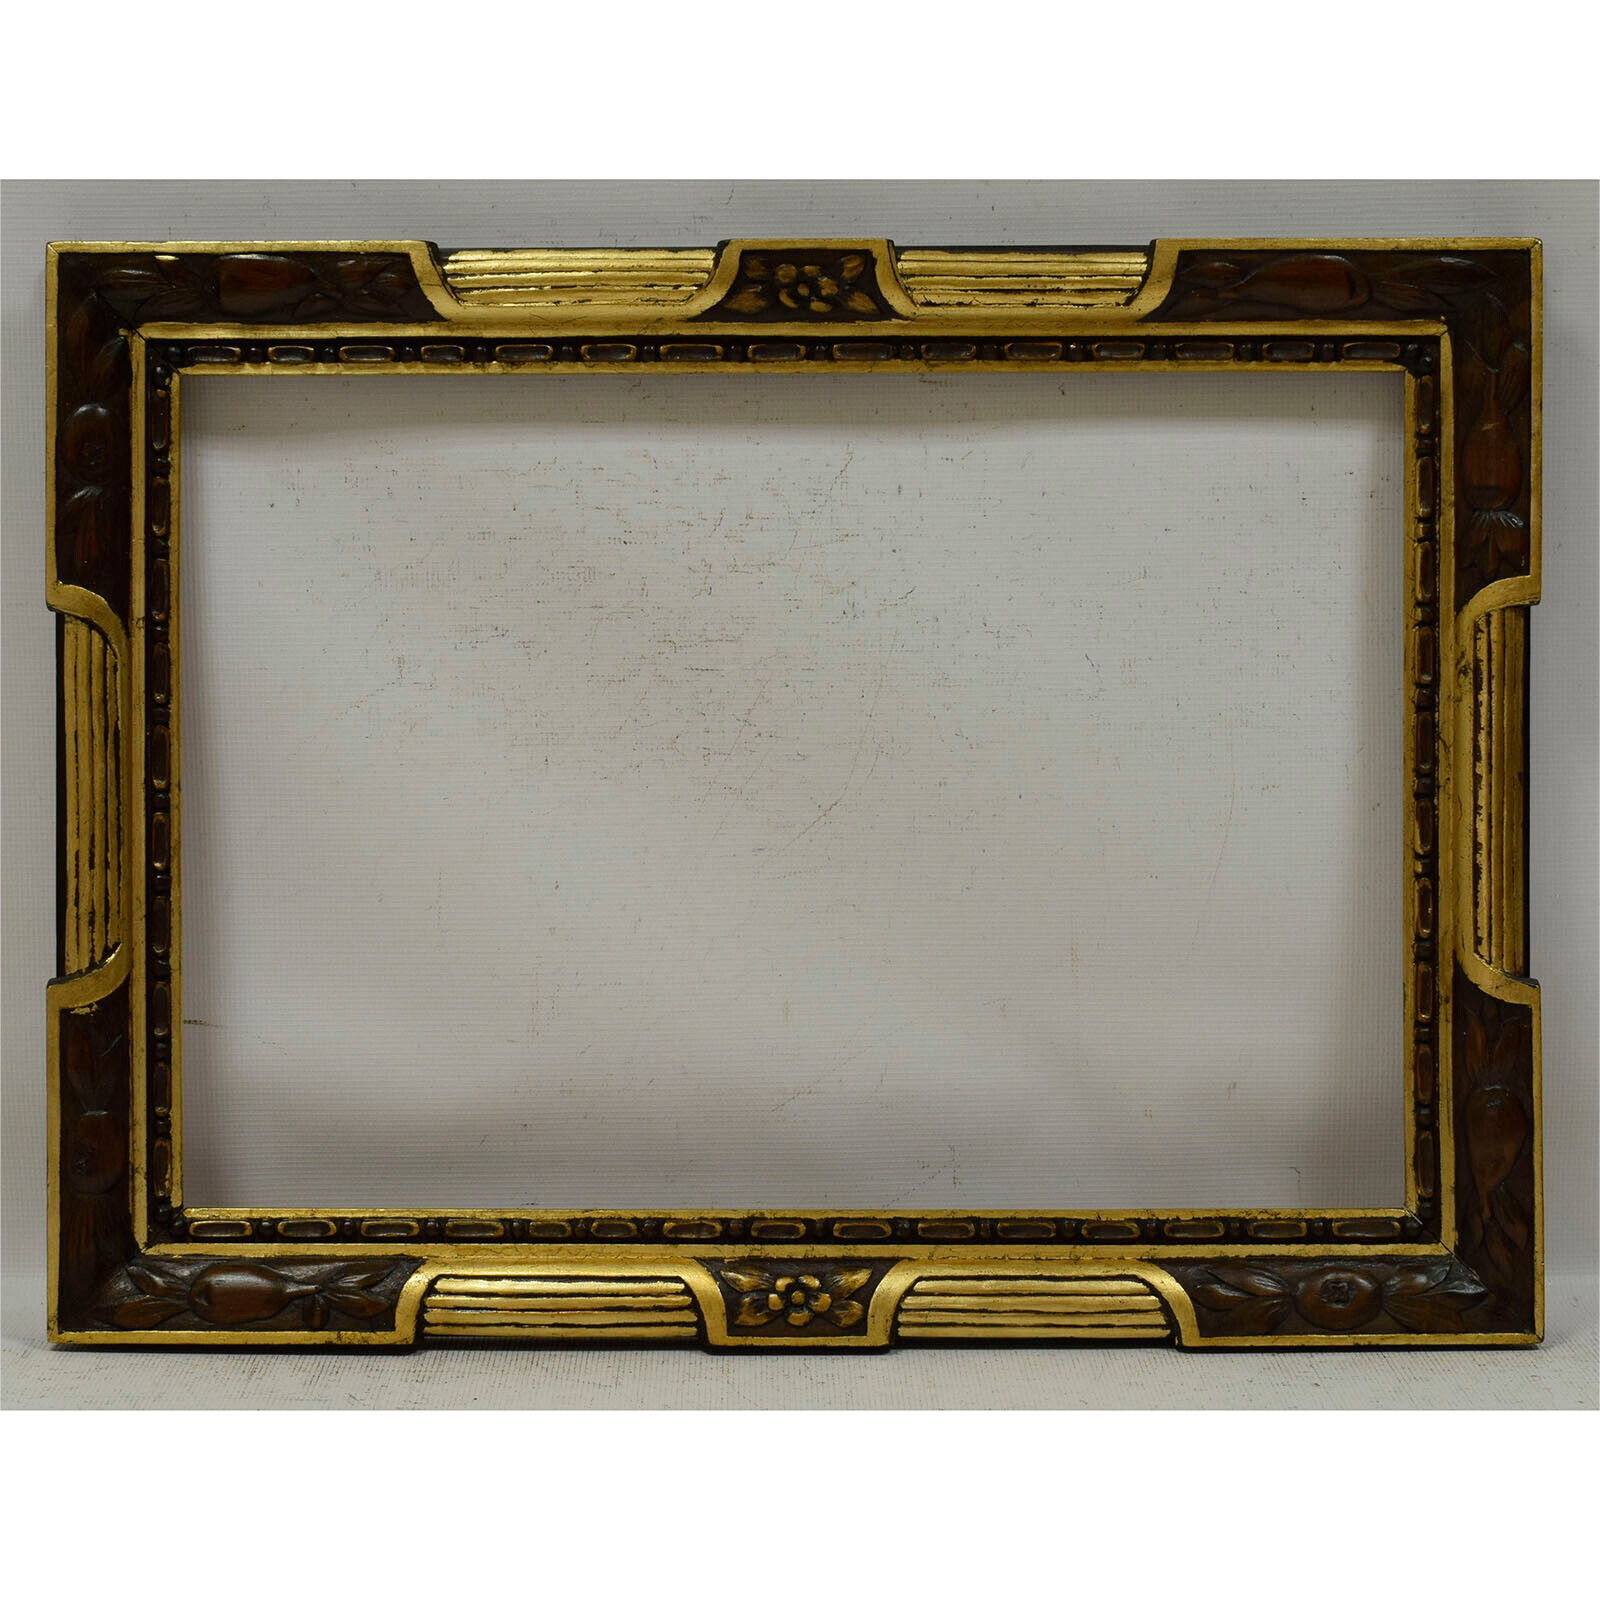 Ca 1900 Old wooden frame original condition with metal leaf Internal: 25,7x17,9